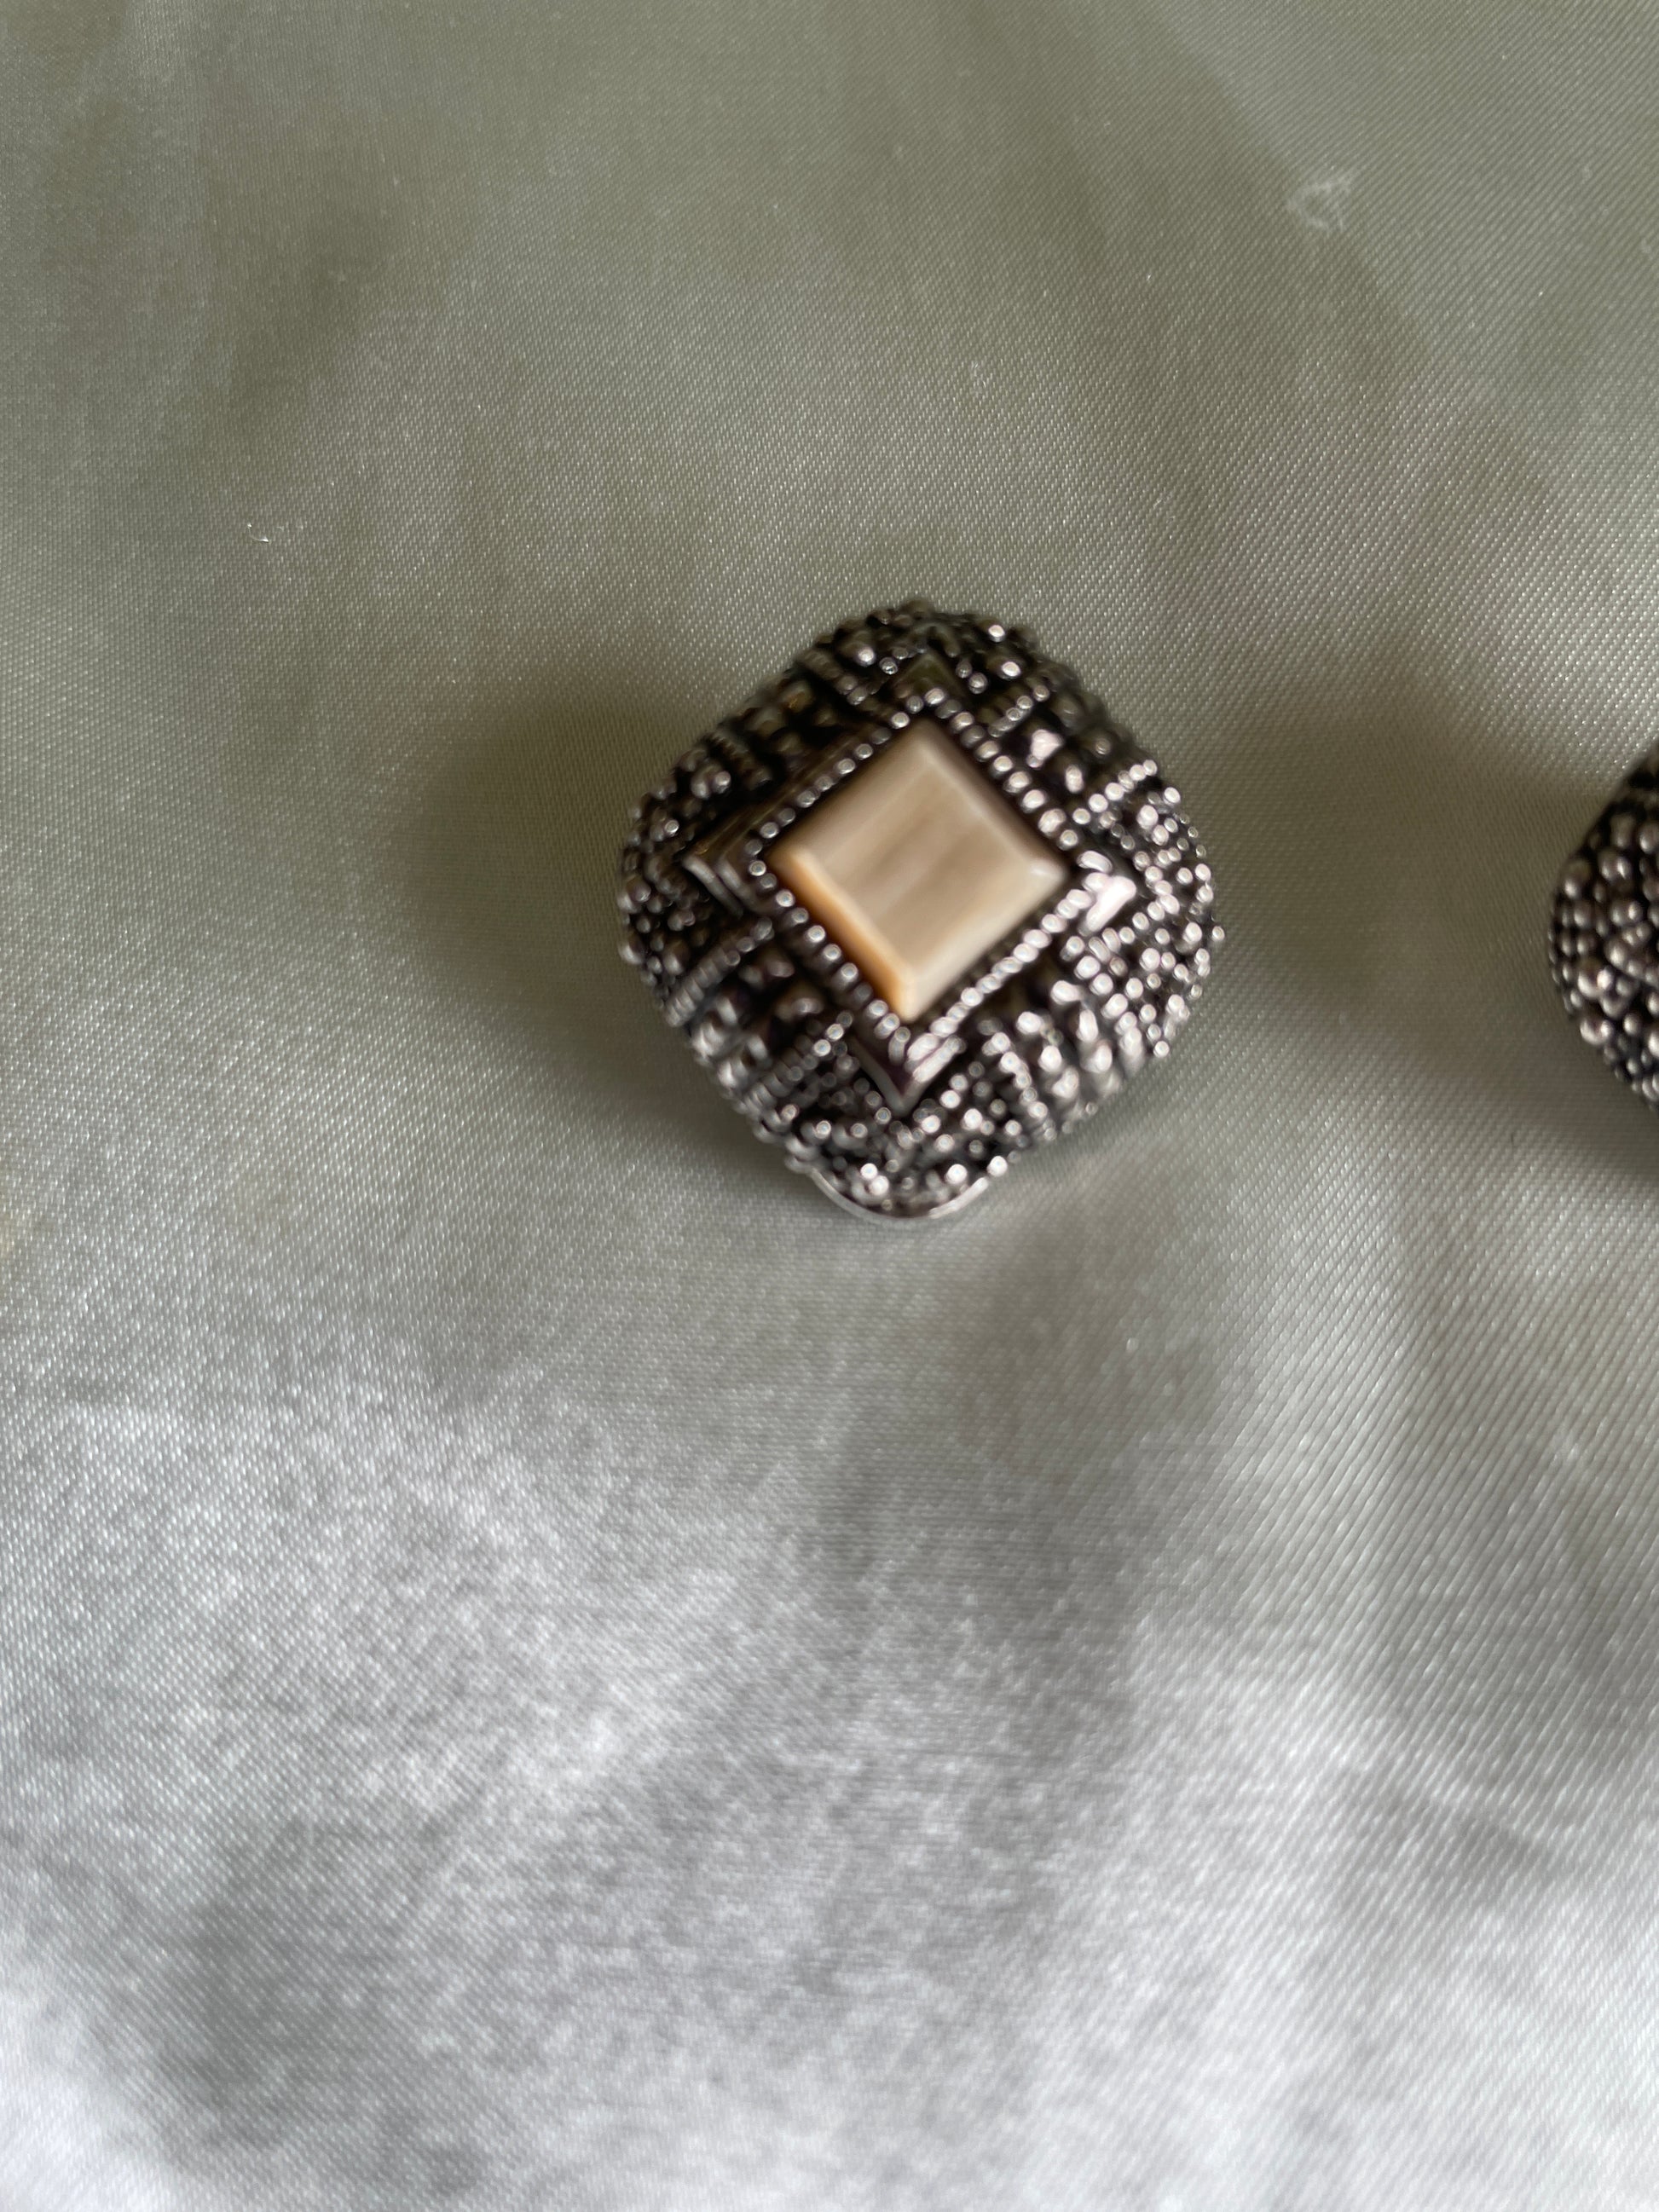  80s Silver Tone Mother of Pearl Accent Clip Earrings